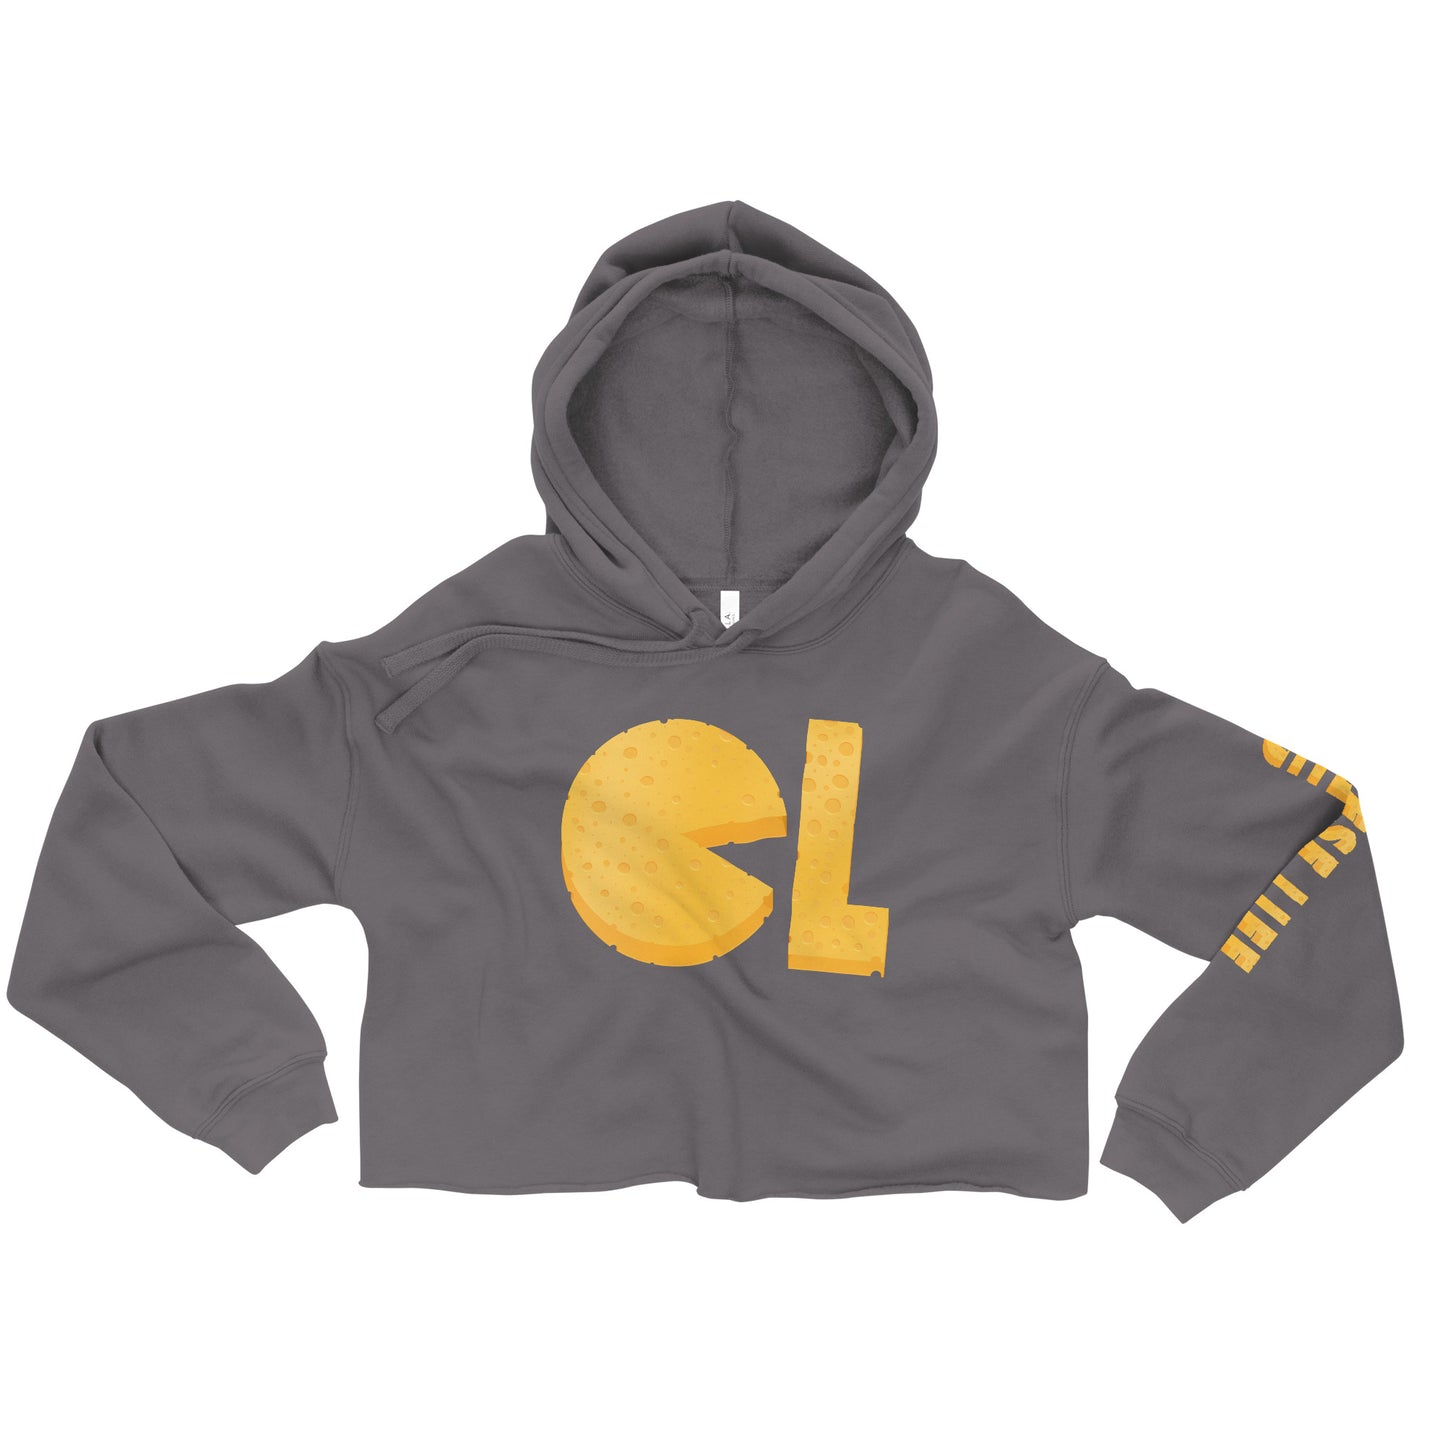 Womens Cheese Life Logo Cropped Hoodie